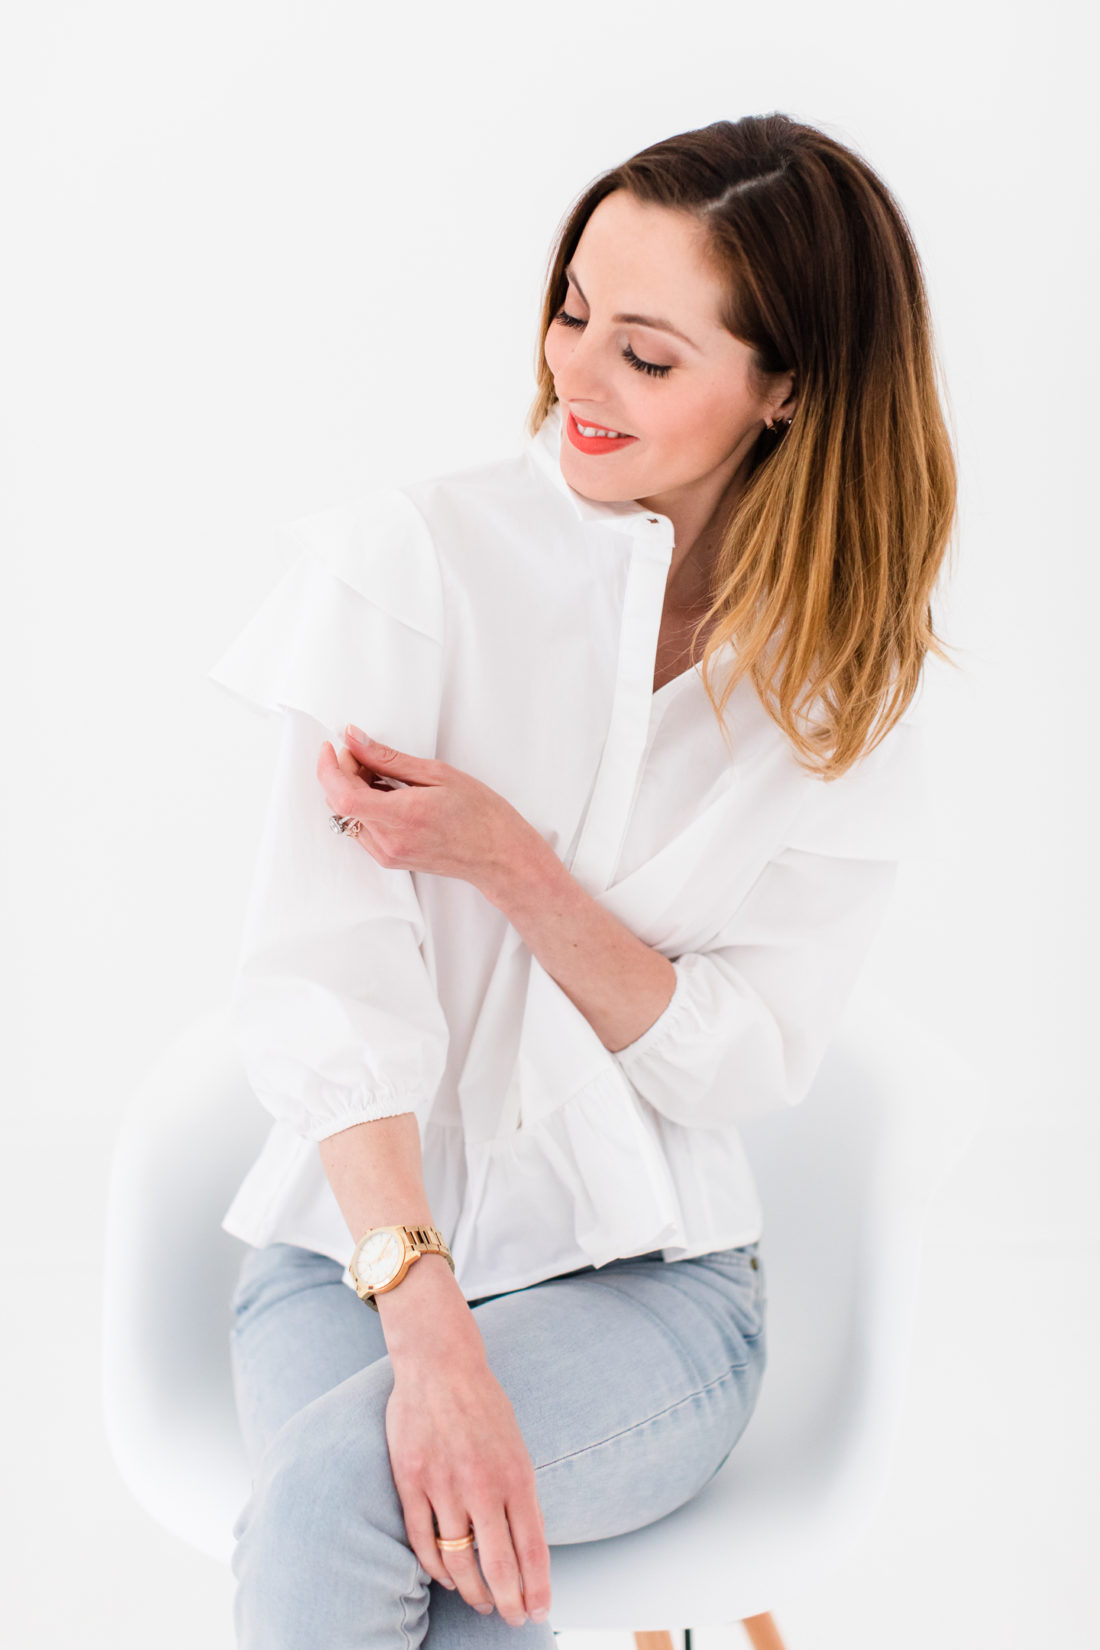 Eva Amurri Martino wears a white button down shirt with ruffle details and jeans with flats